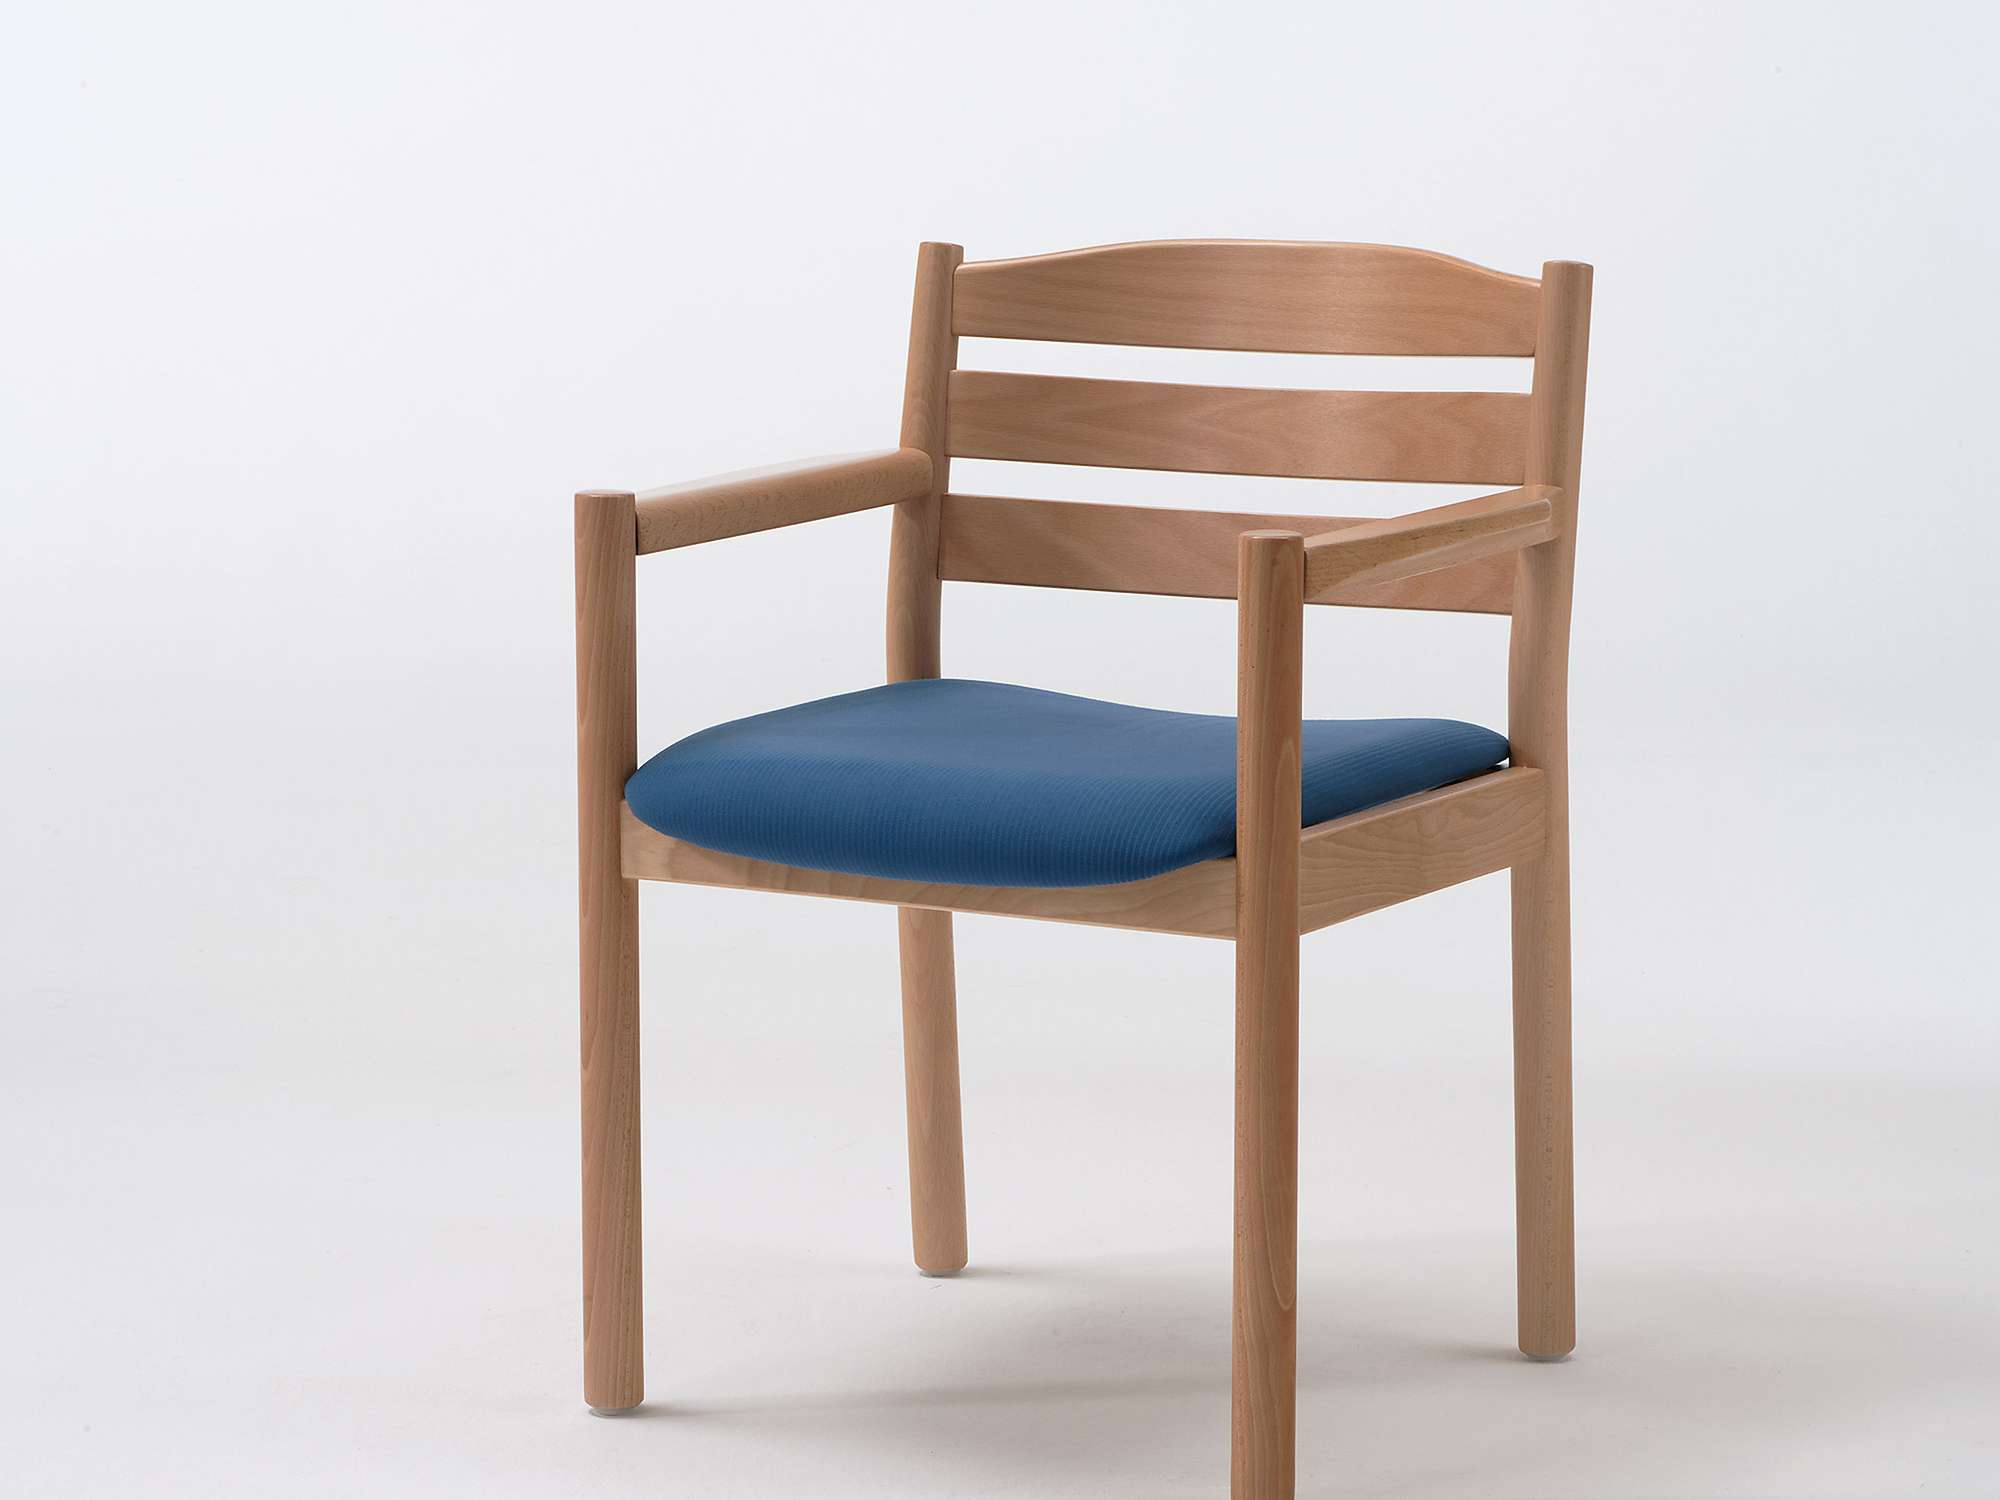 The Primo as an armchair with non-upholstered back